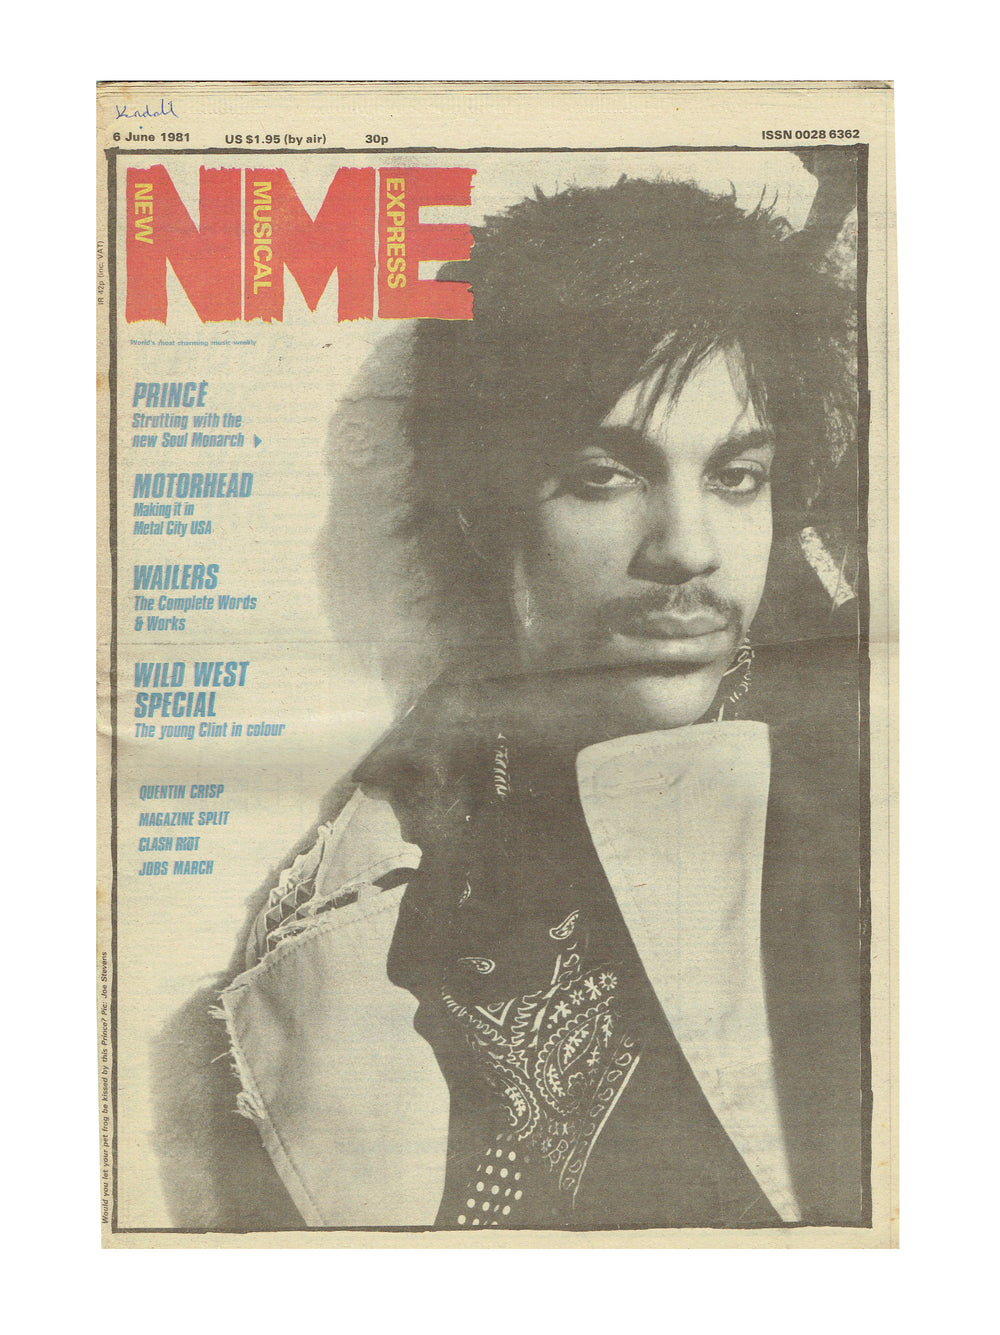 Prince – Full Page Cover Newspaper NME 6th June 1981